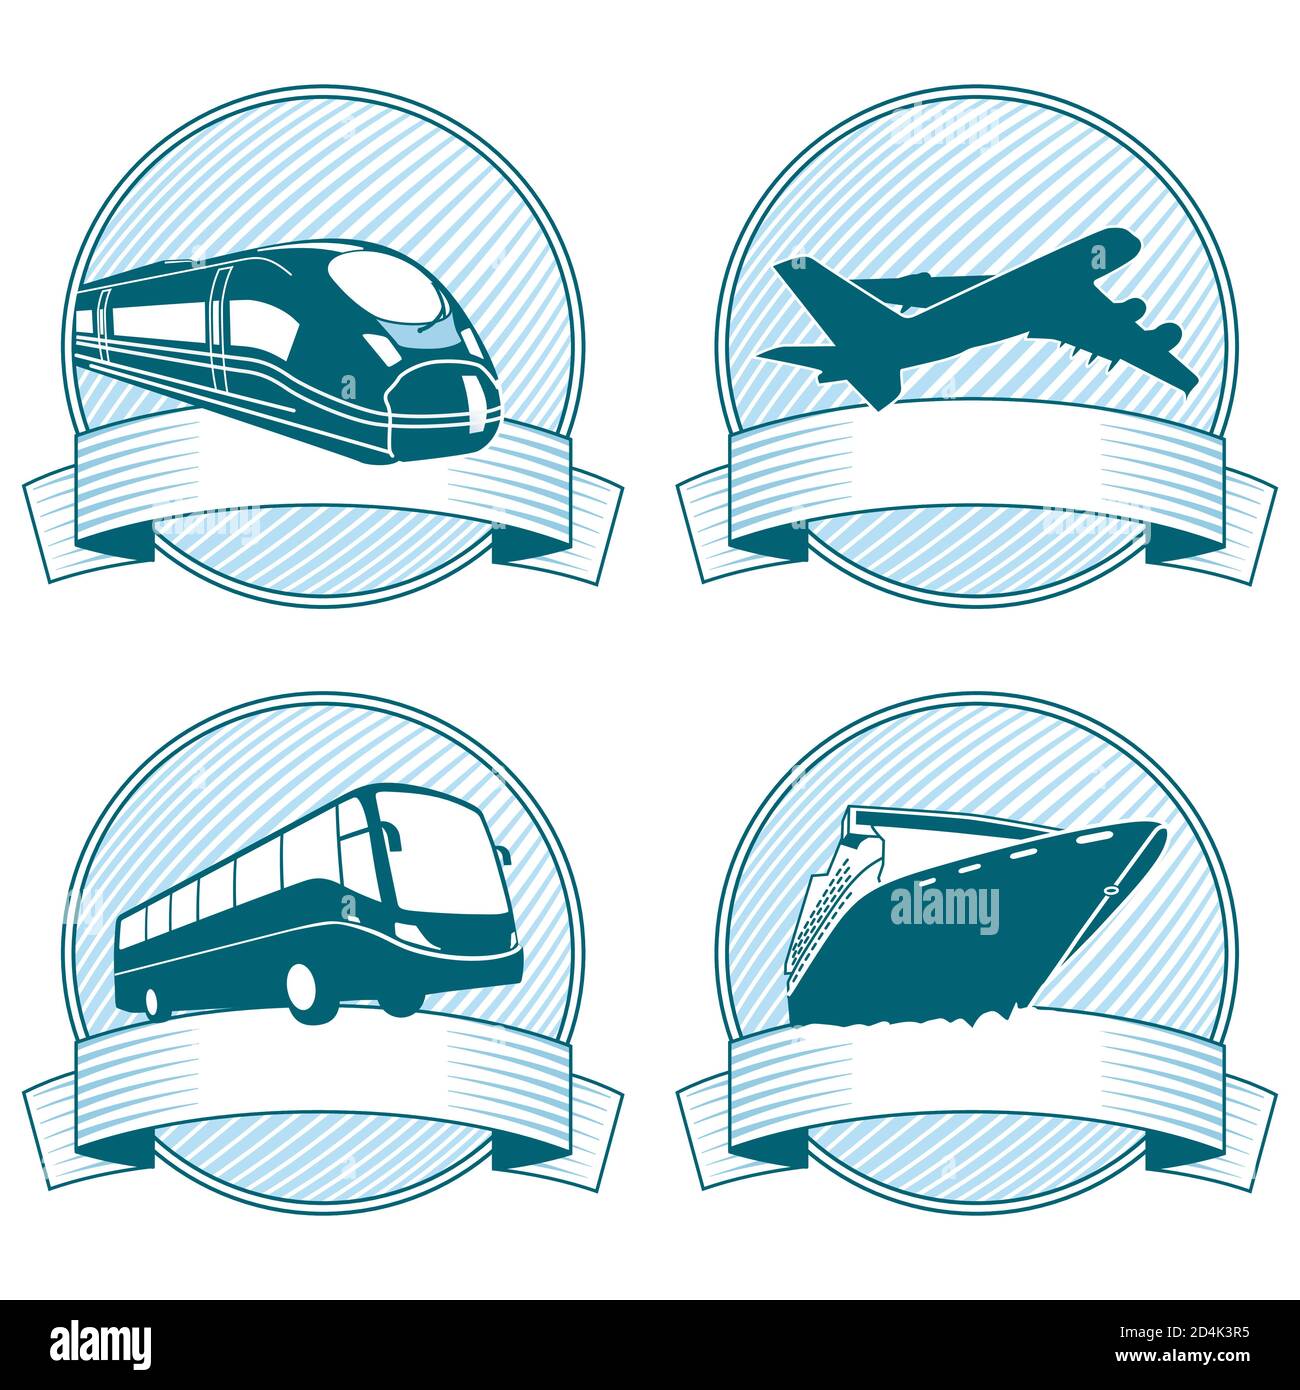 Travel by bus, train, plane and cruise ship, label - vector illustration Stock Vector